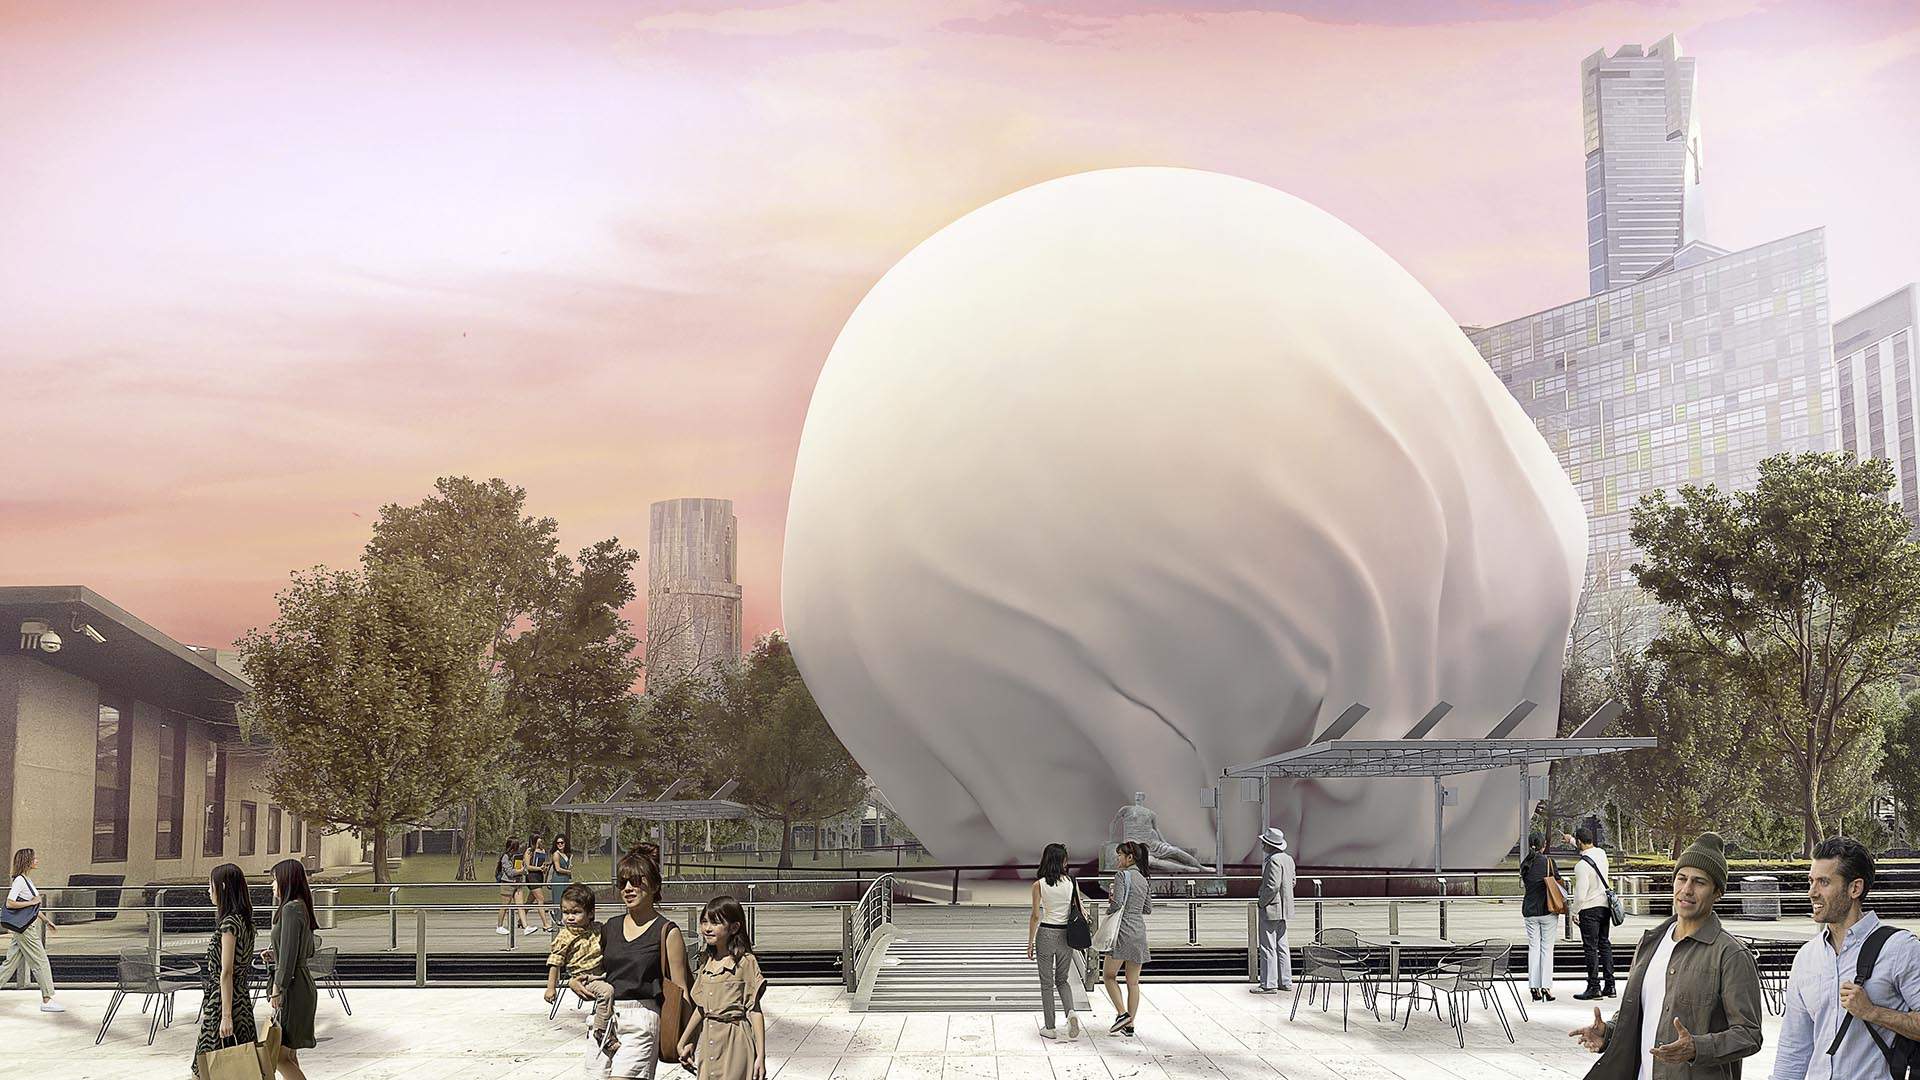 A 14-Metre-Tall Inflatable Sphere That Breathes Is Popping Up Outside Melbourne's NGV This Summer